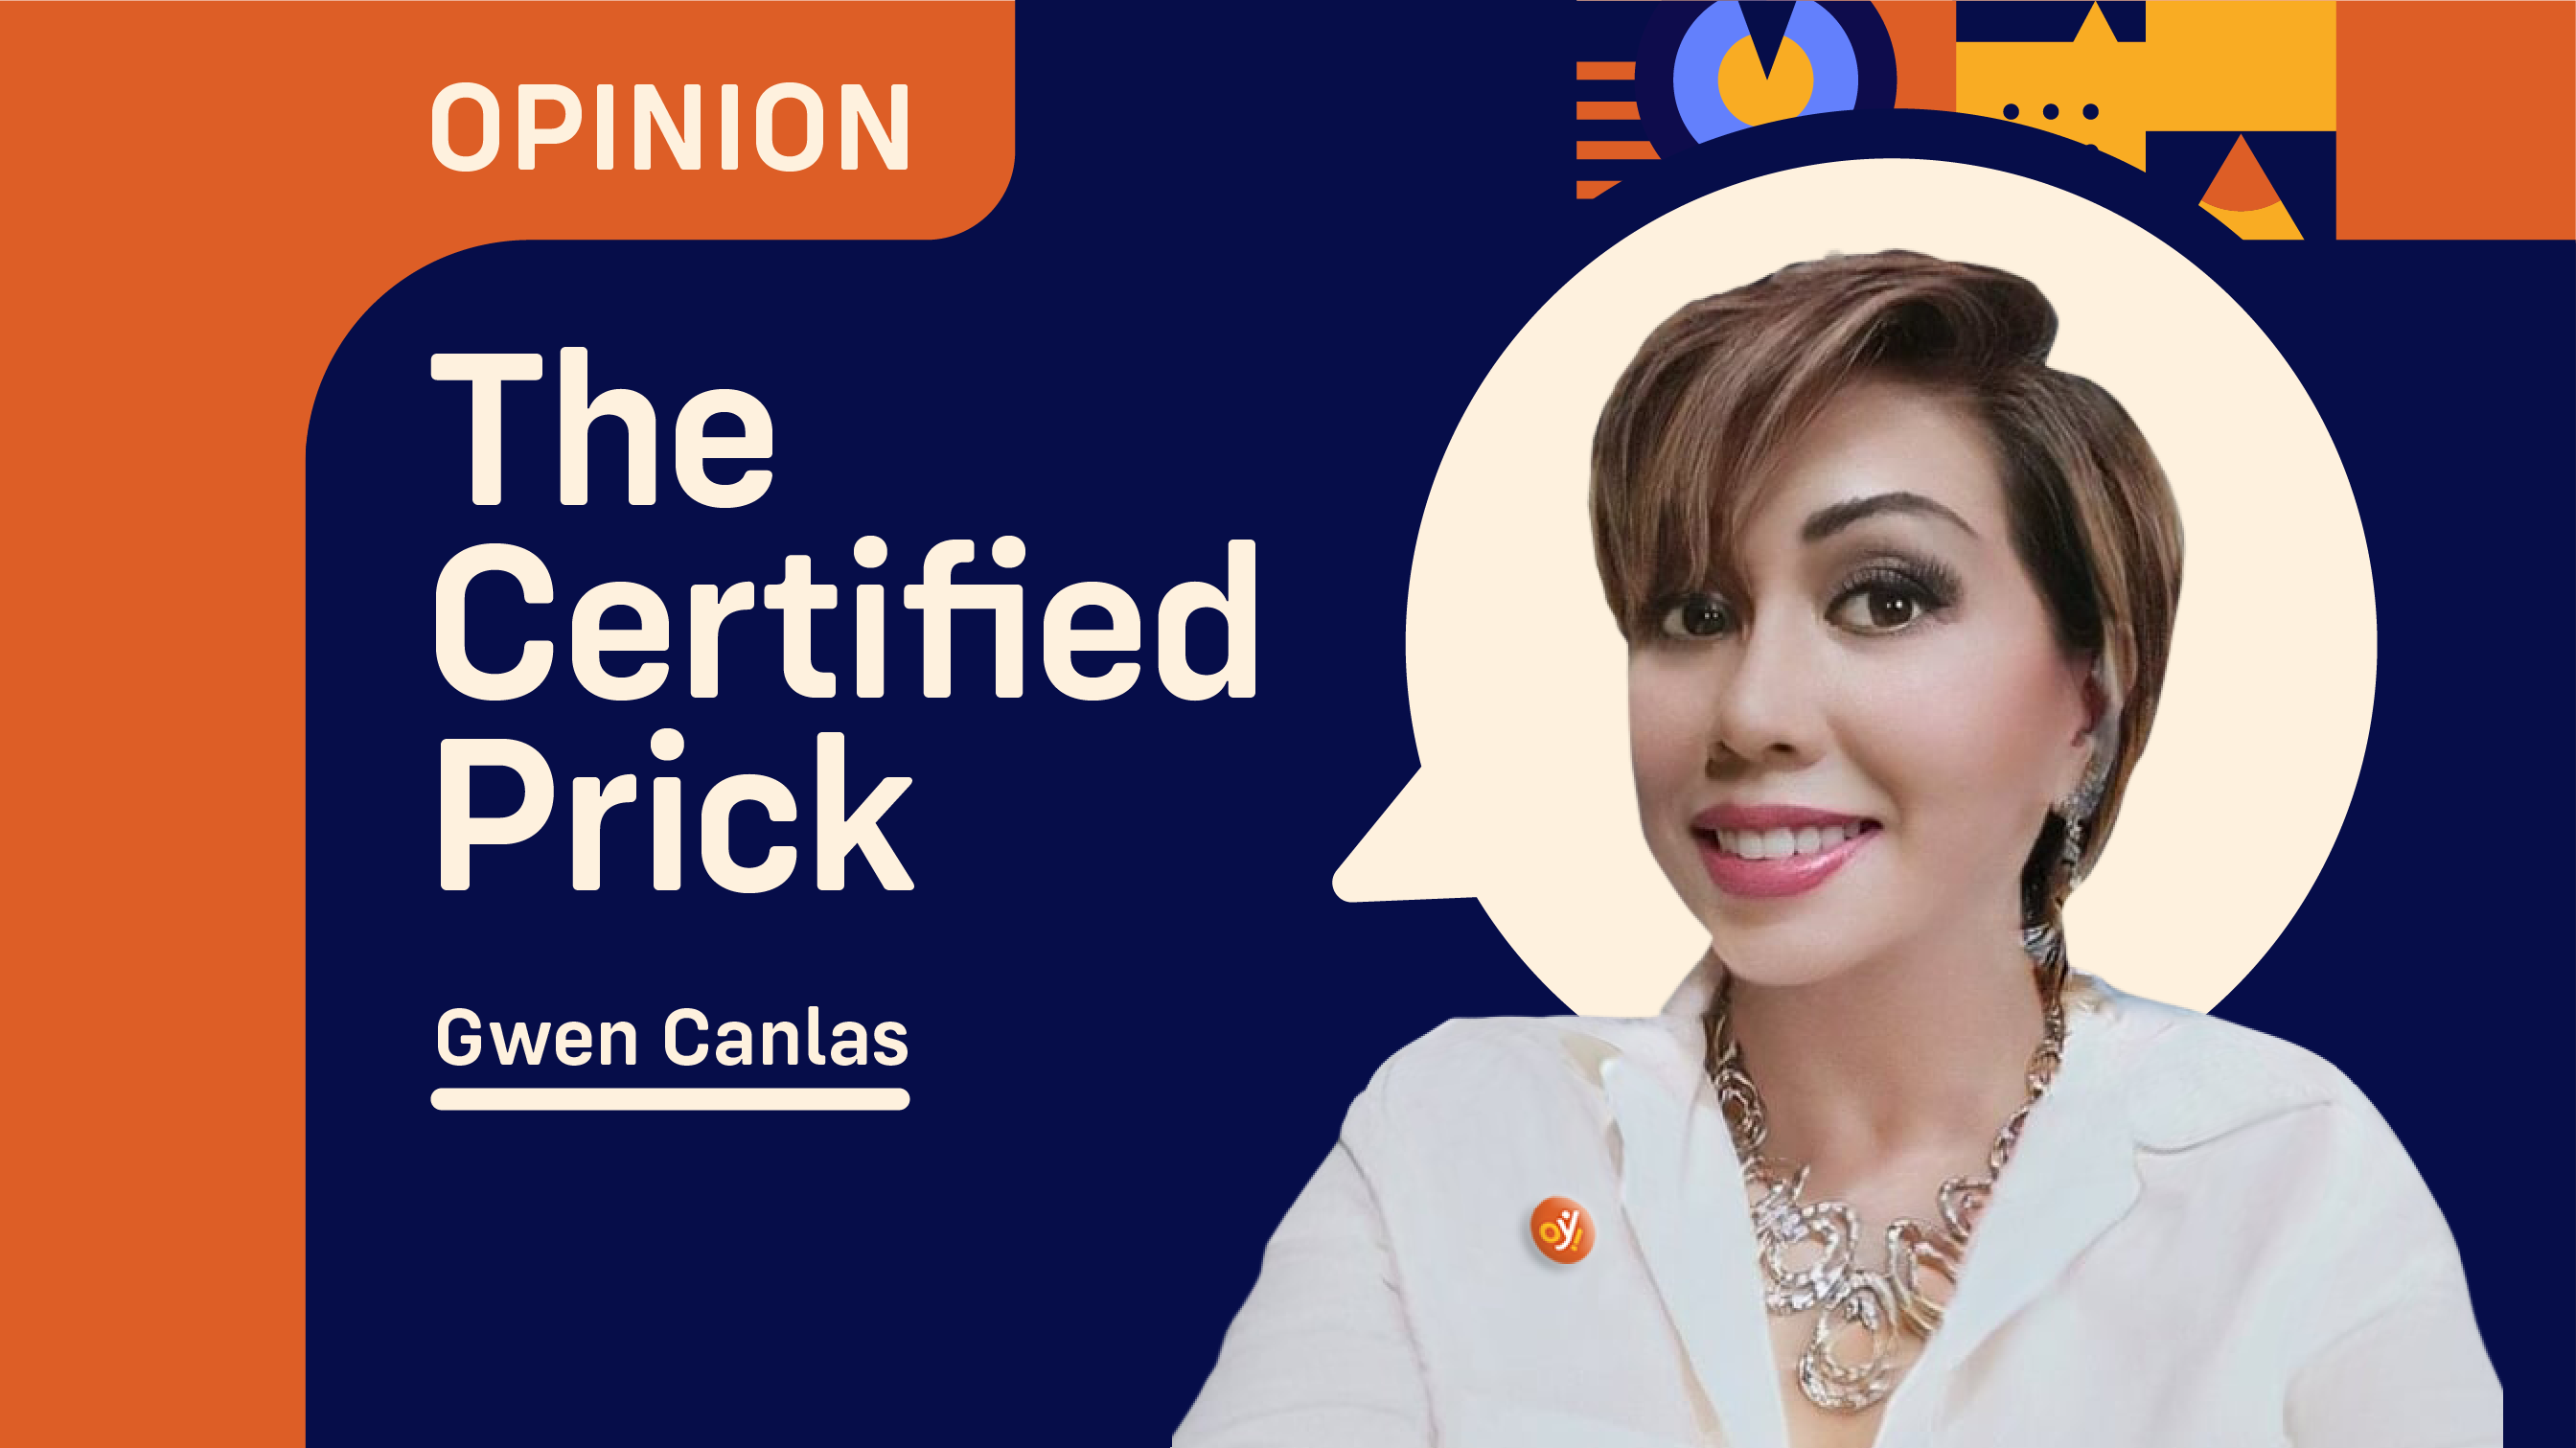 The Certified Prick by Gwenn Canlas